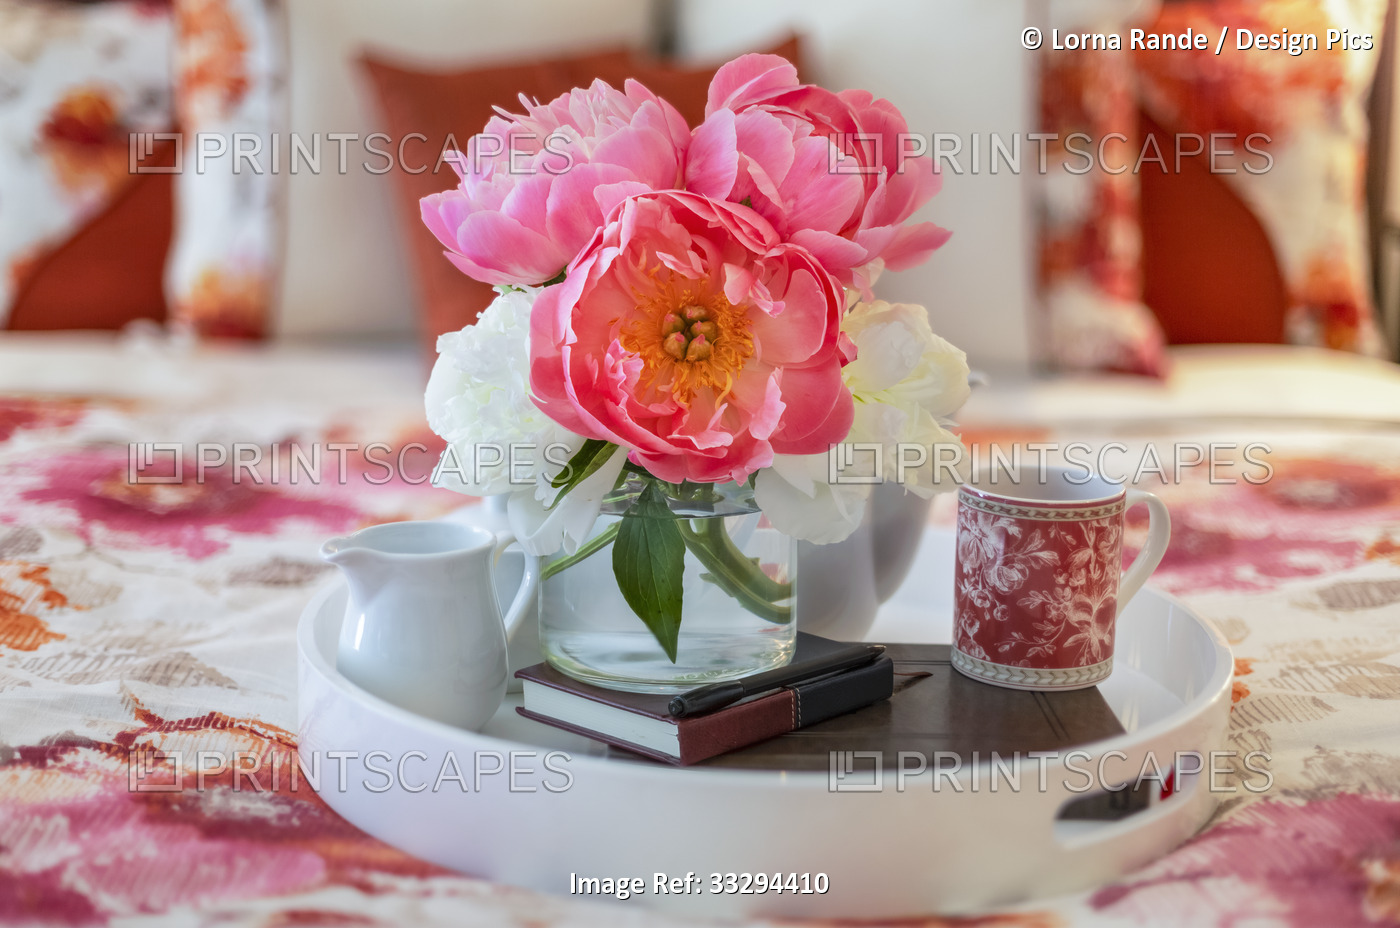 Bouquet of pink and white peonies on a bed tray with a coffee mug, journal and ...